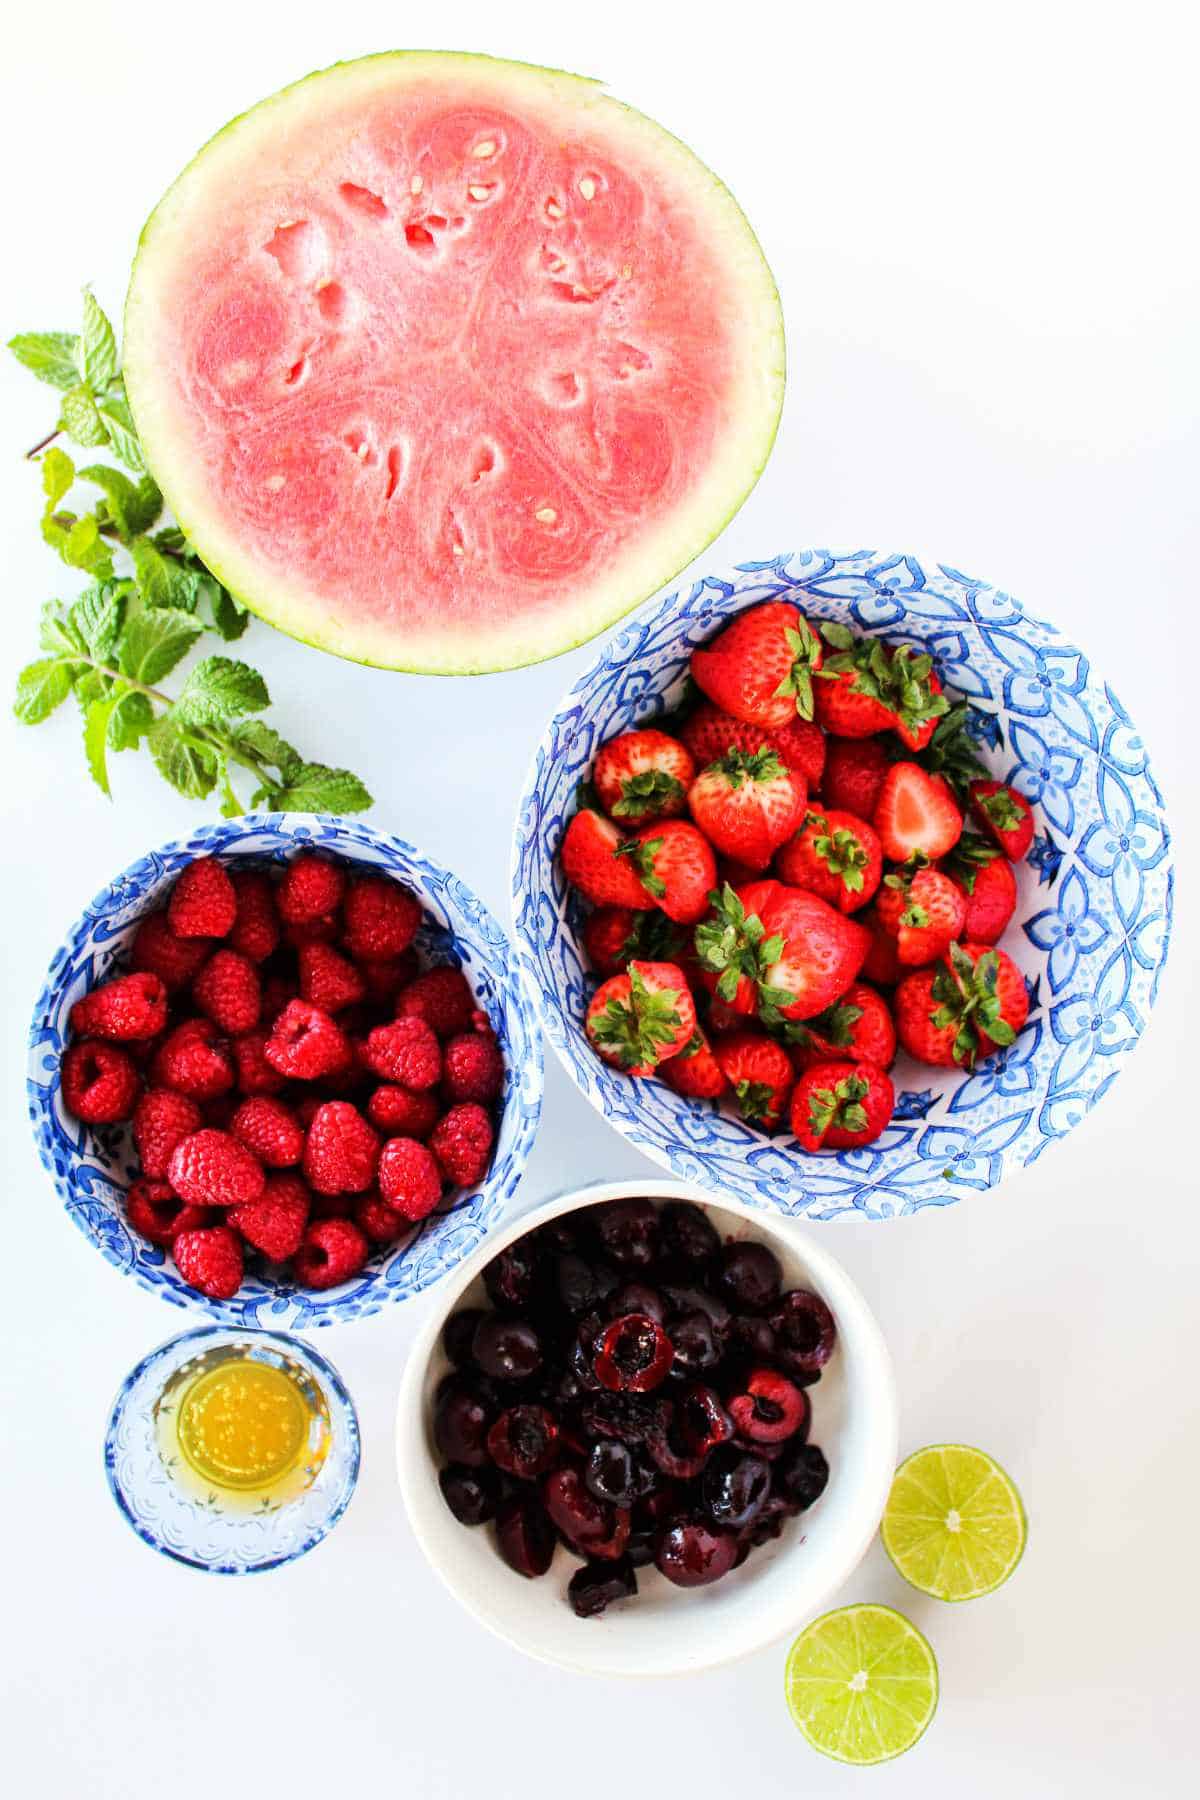 watermelon, raspberries, strawberries, cherries, and limes on a white background.